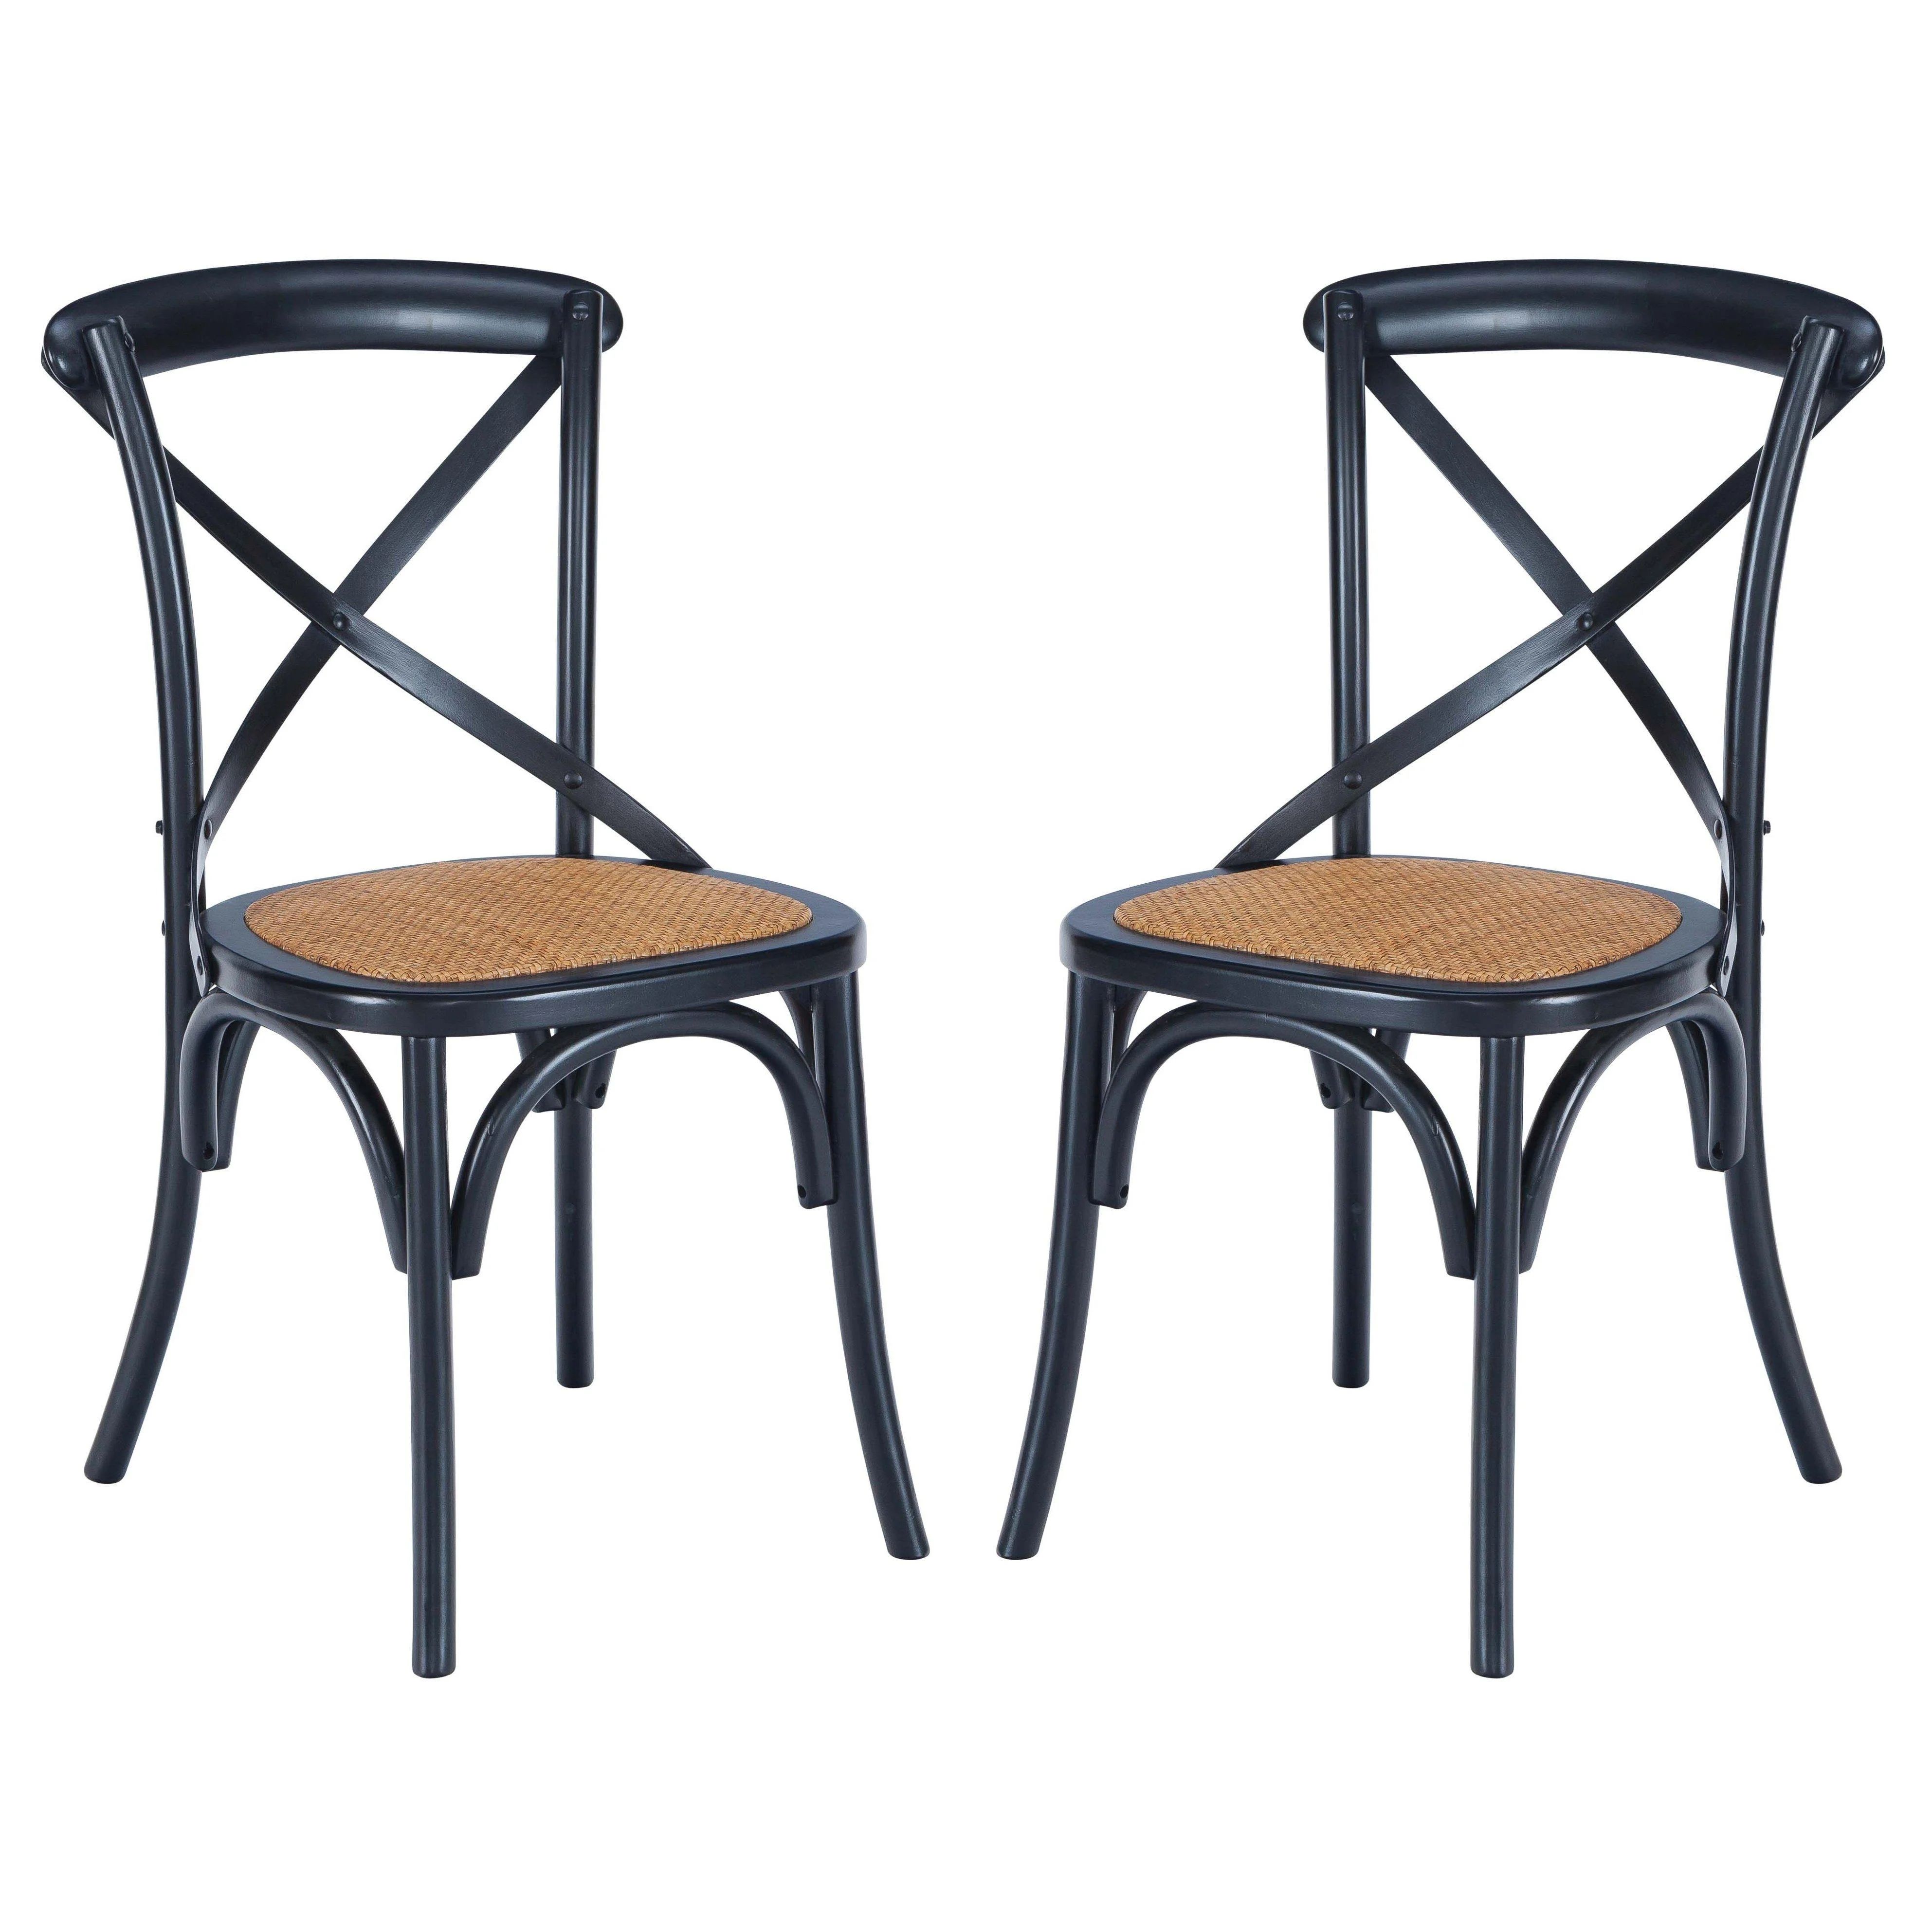 Poly and Bark Cafton Crossback Chair in Black (Set of 2) | Walmart (US)